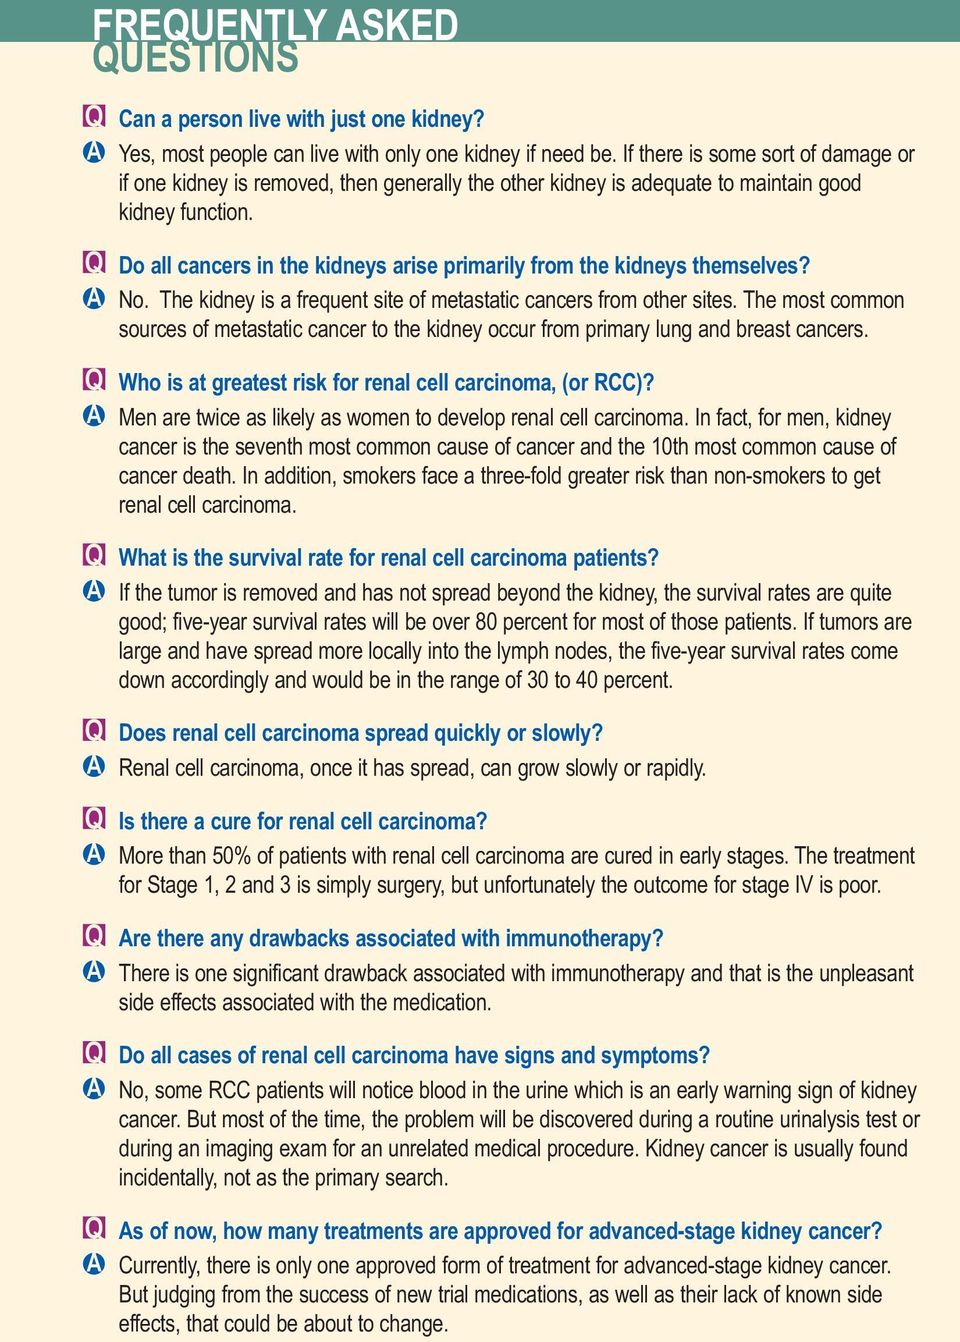 Do all cancers in the kidneys arise primarily from the kidneys themselves? No. The kidney is a frequent site of metastatic cancers from other sites.